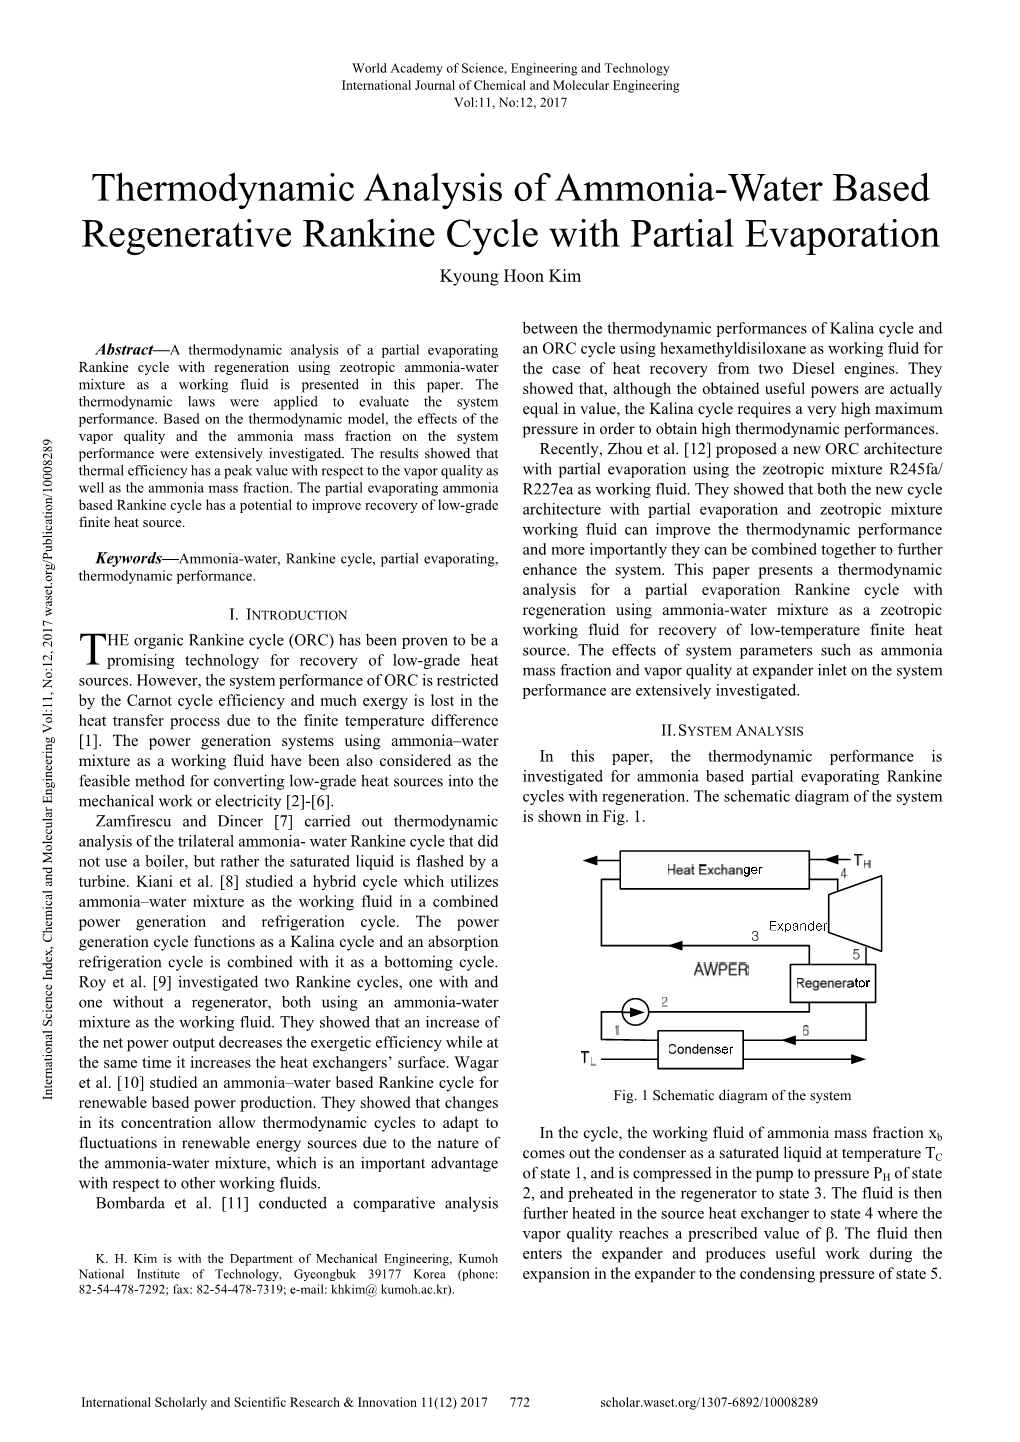 Thermodynamic Analysis of Ammonia-Water Based Regenerative Rankine Cycle with Partial Evaporation Kyoung Hoon Kim